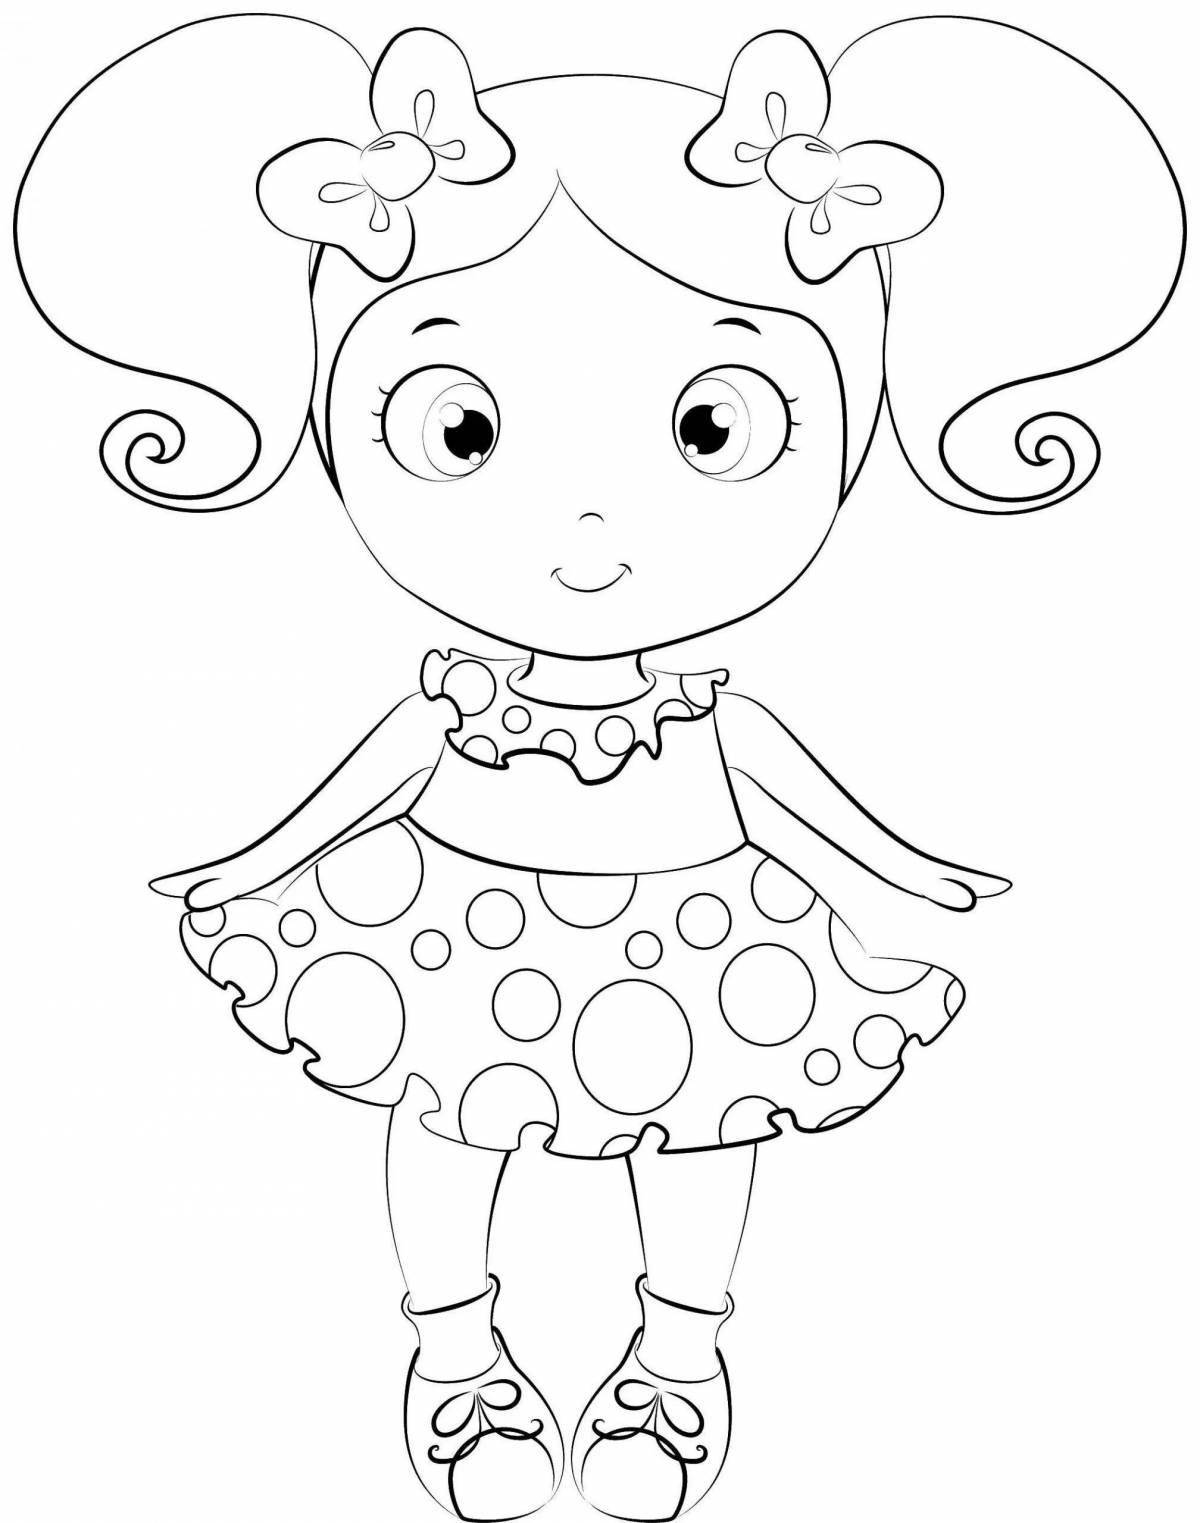 Exquisite baby doll coloring book